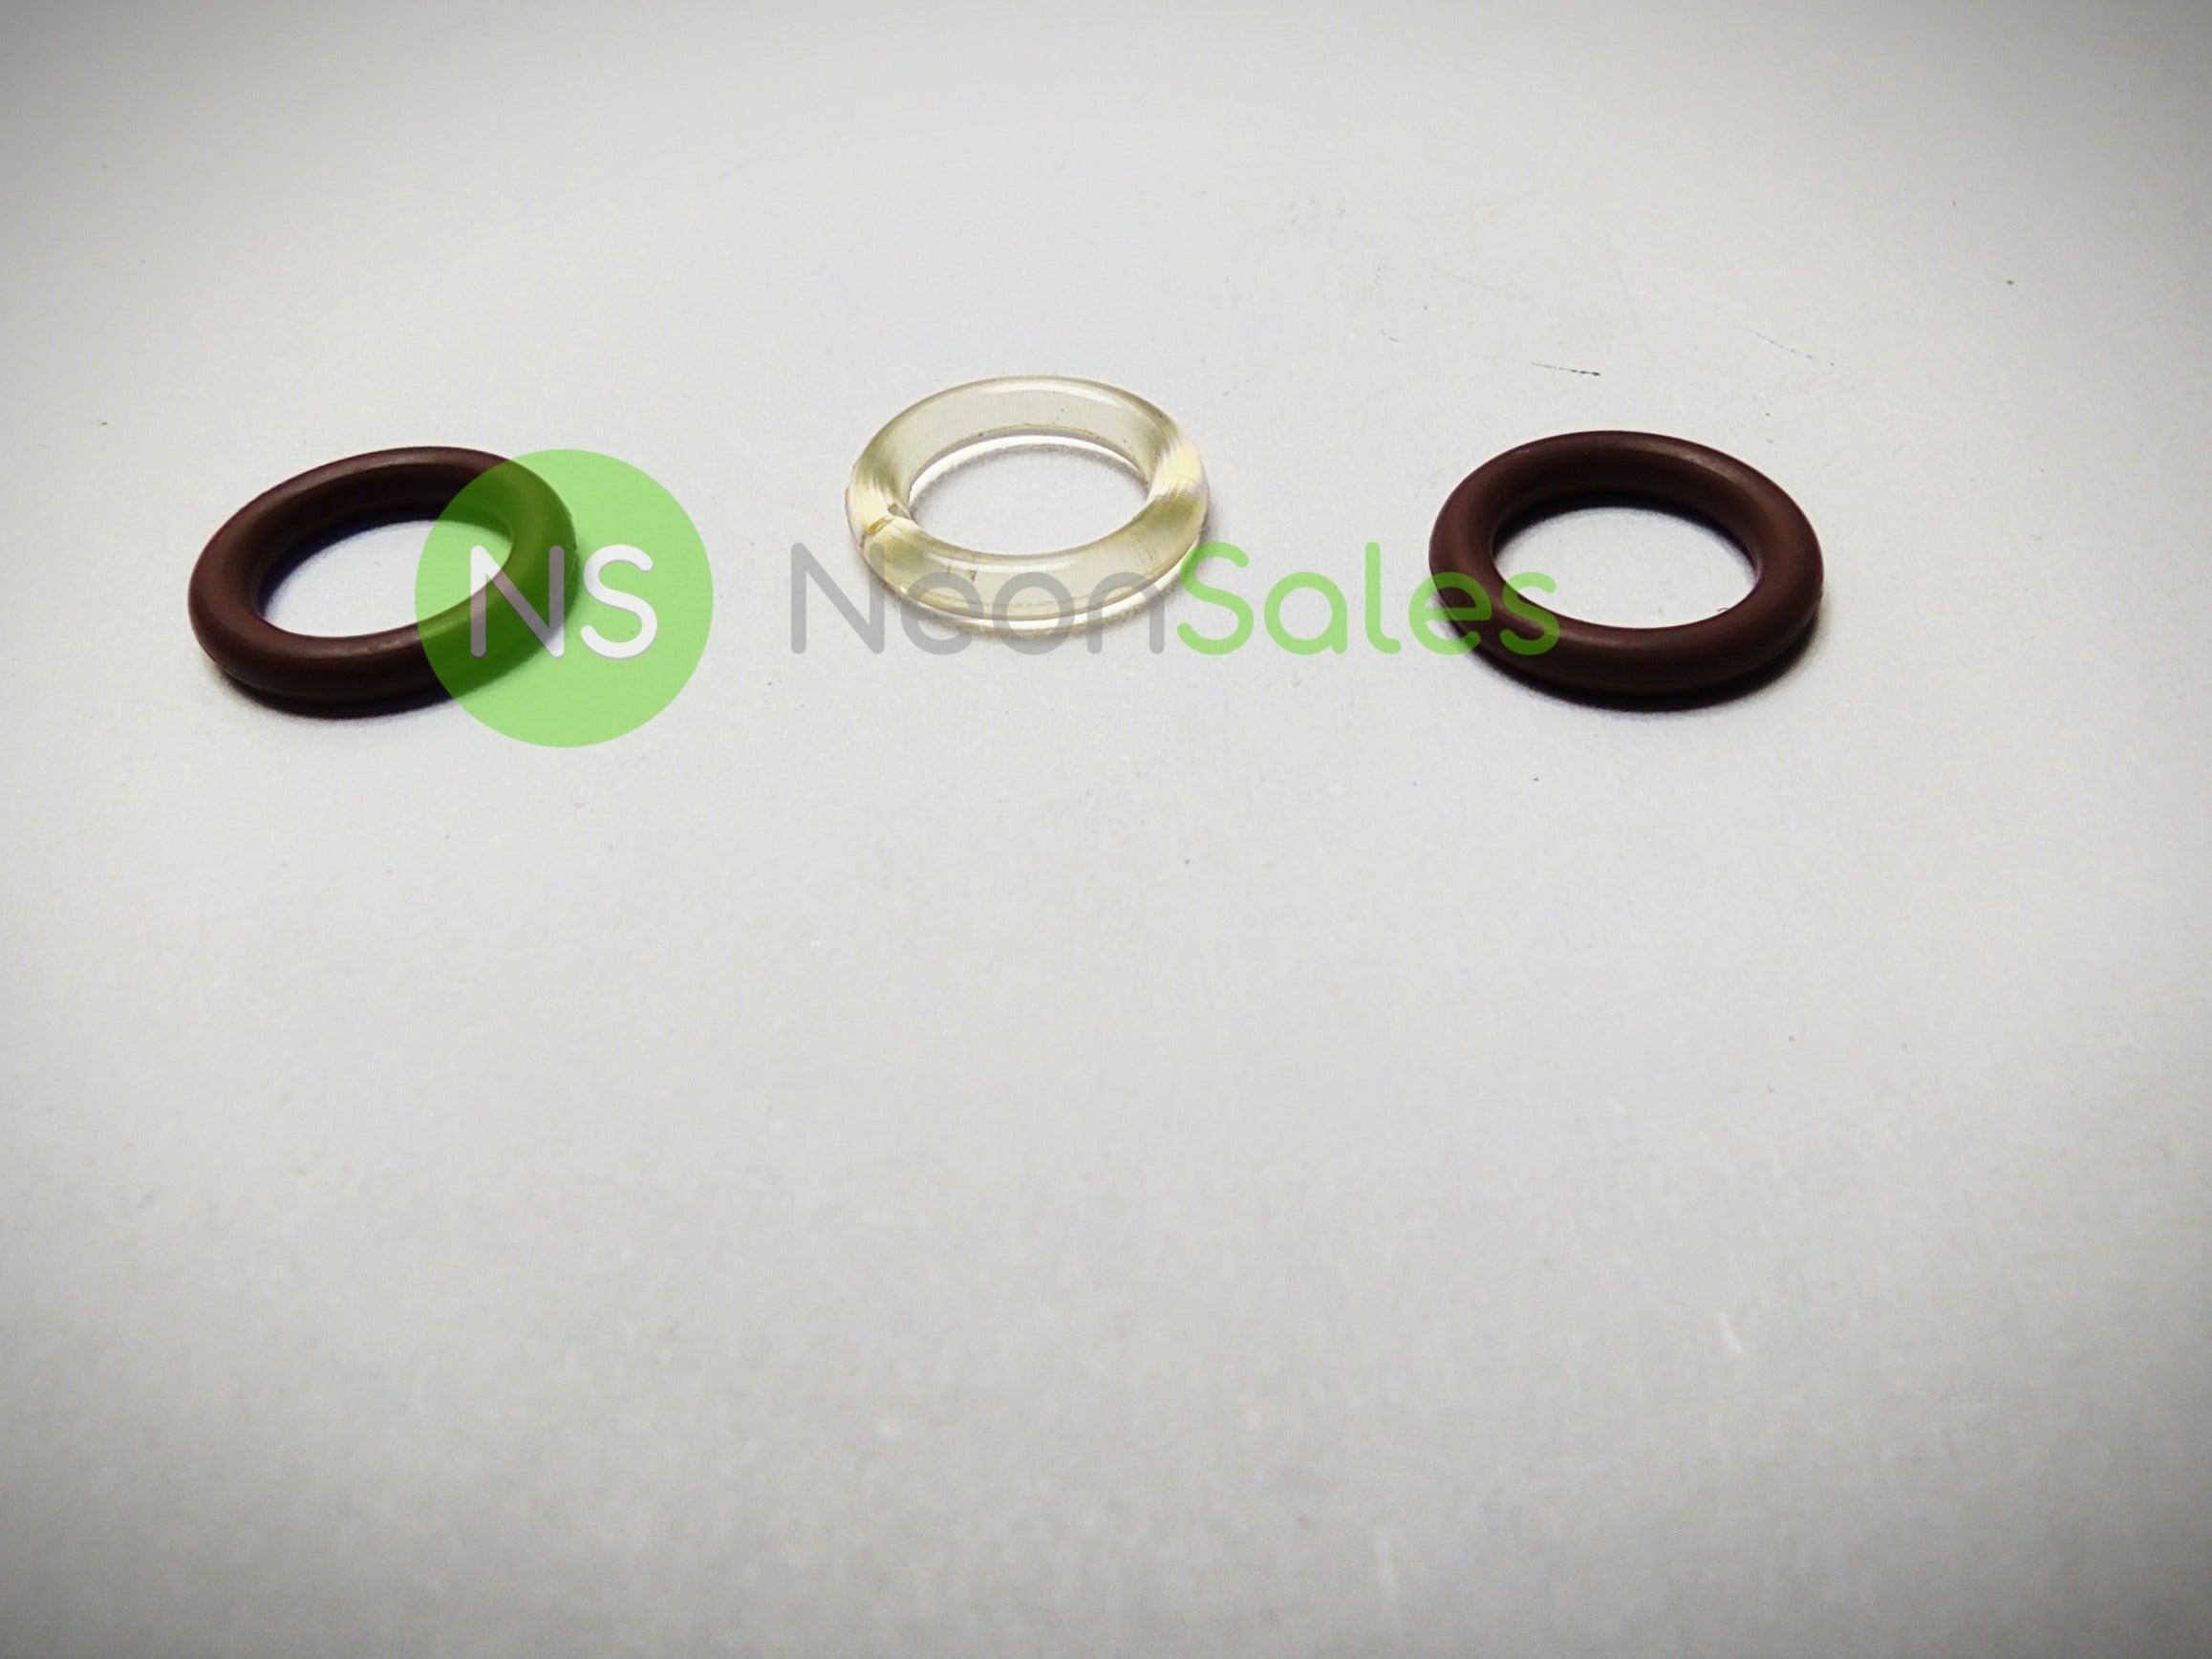 HDR50 FORWARD VALVE ASSEMBLY O-RING (PART 7-05) - NeonSales South Africa